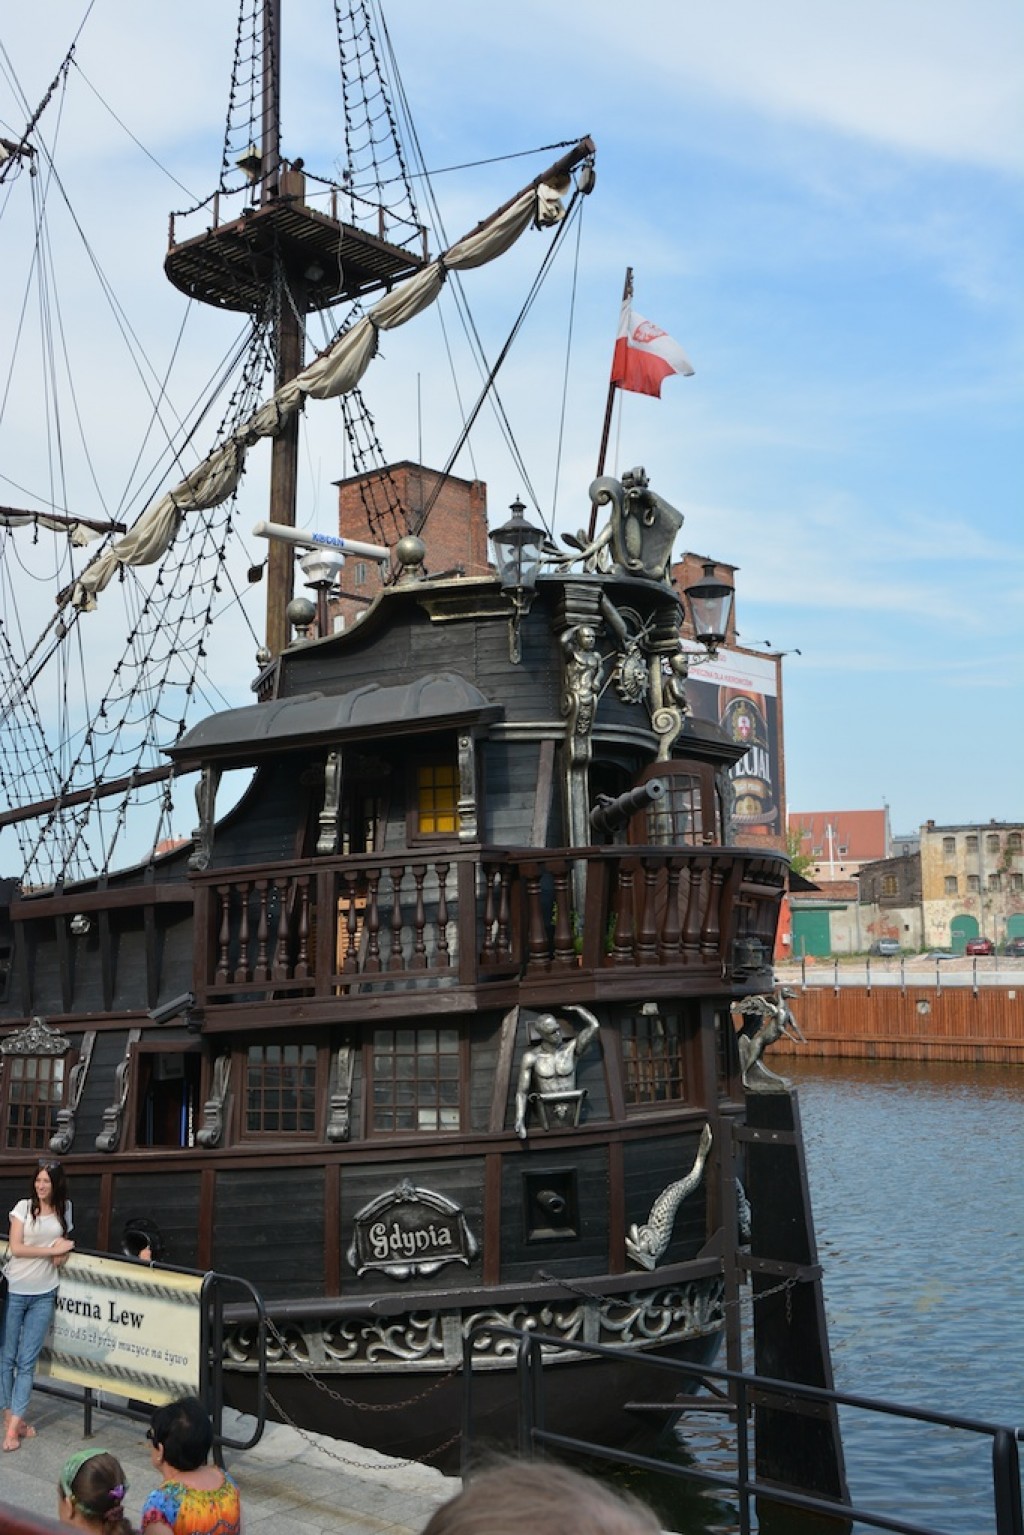 This pirate ship tours the harbor - fun thing for kids